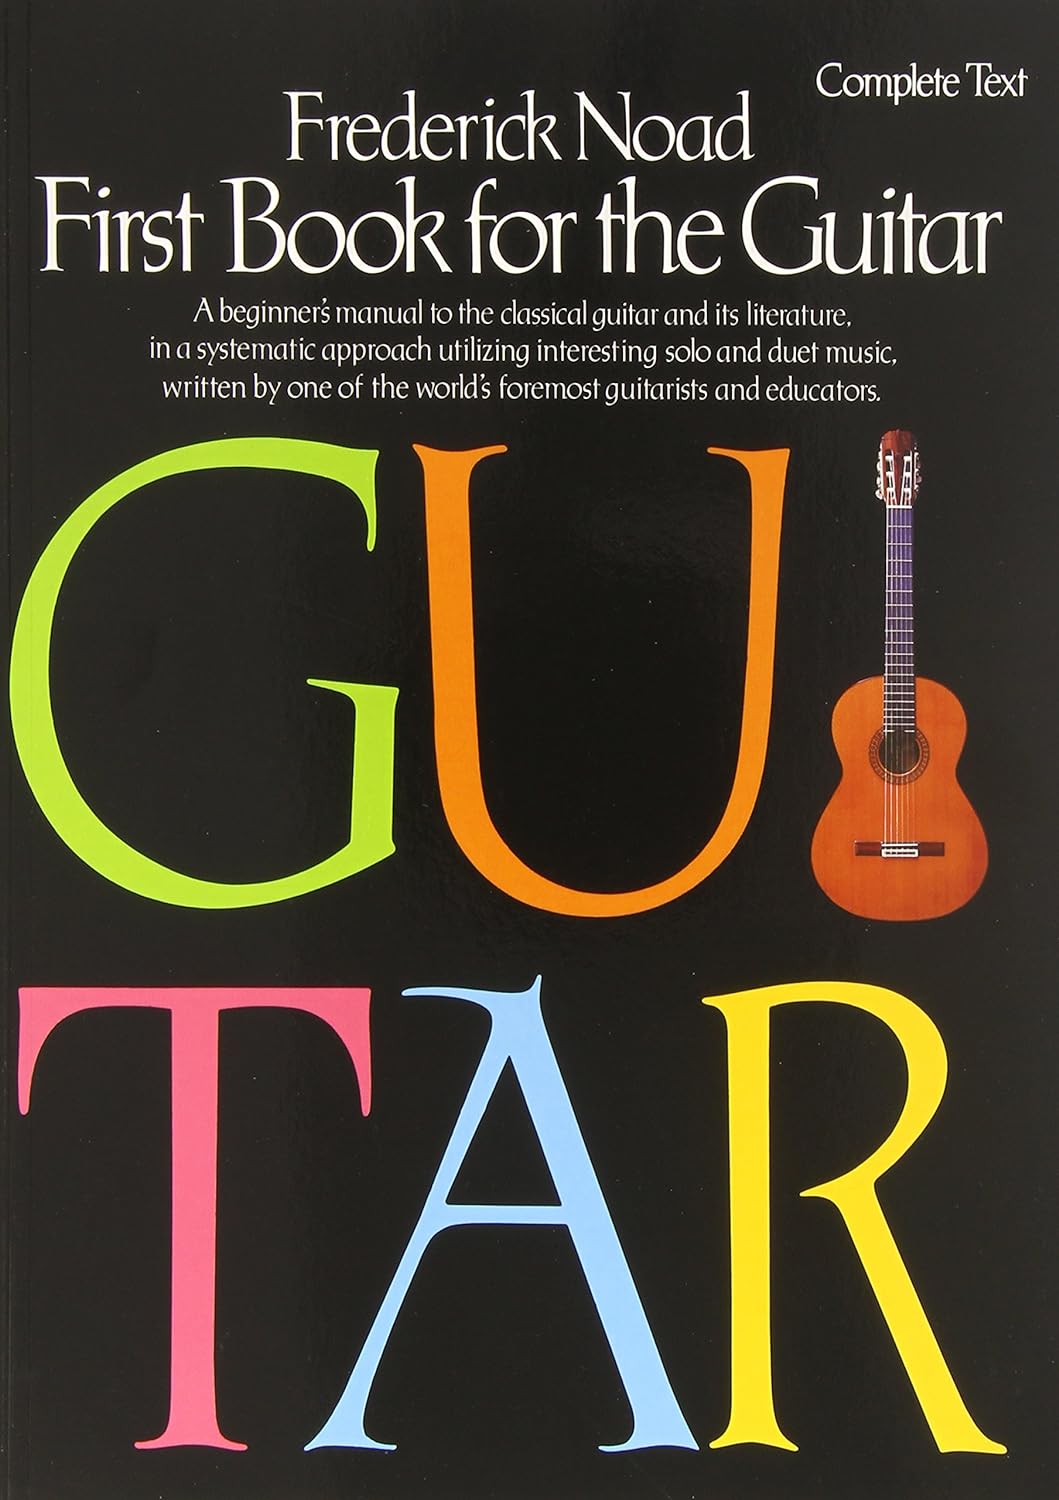 Frederick Noad First Book for the Guitar – Complete